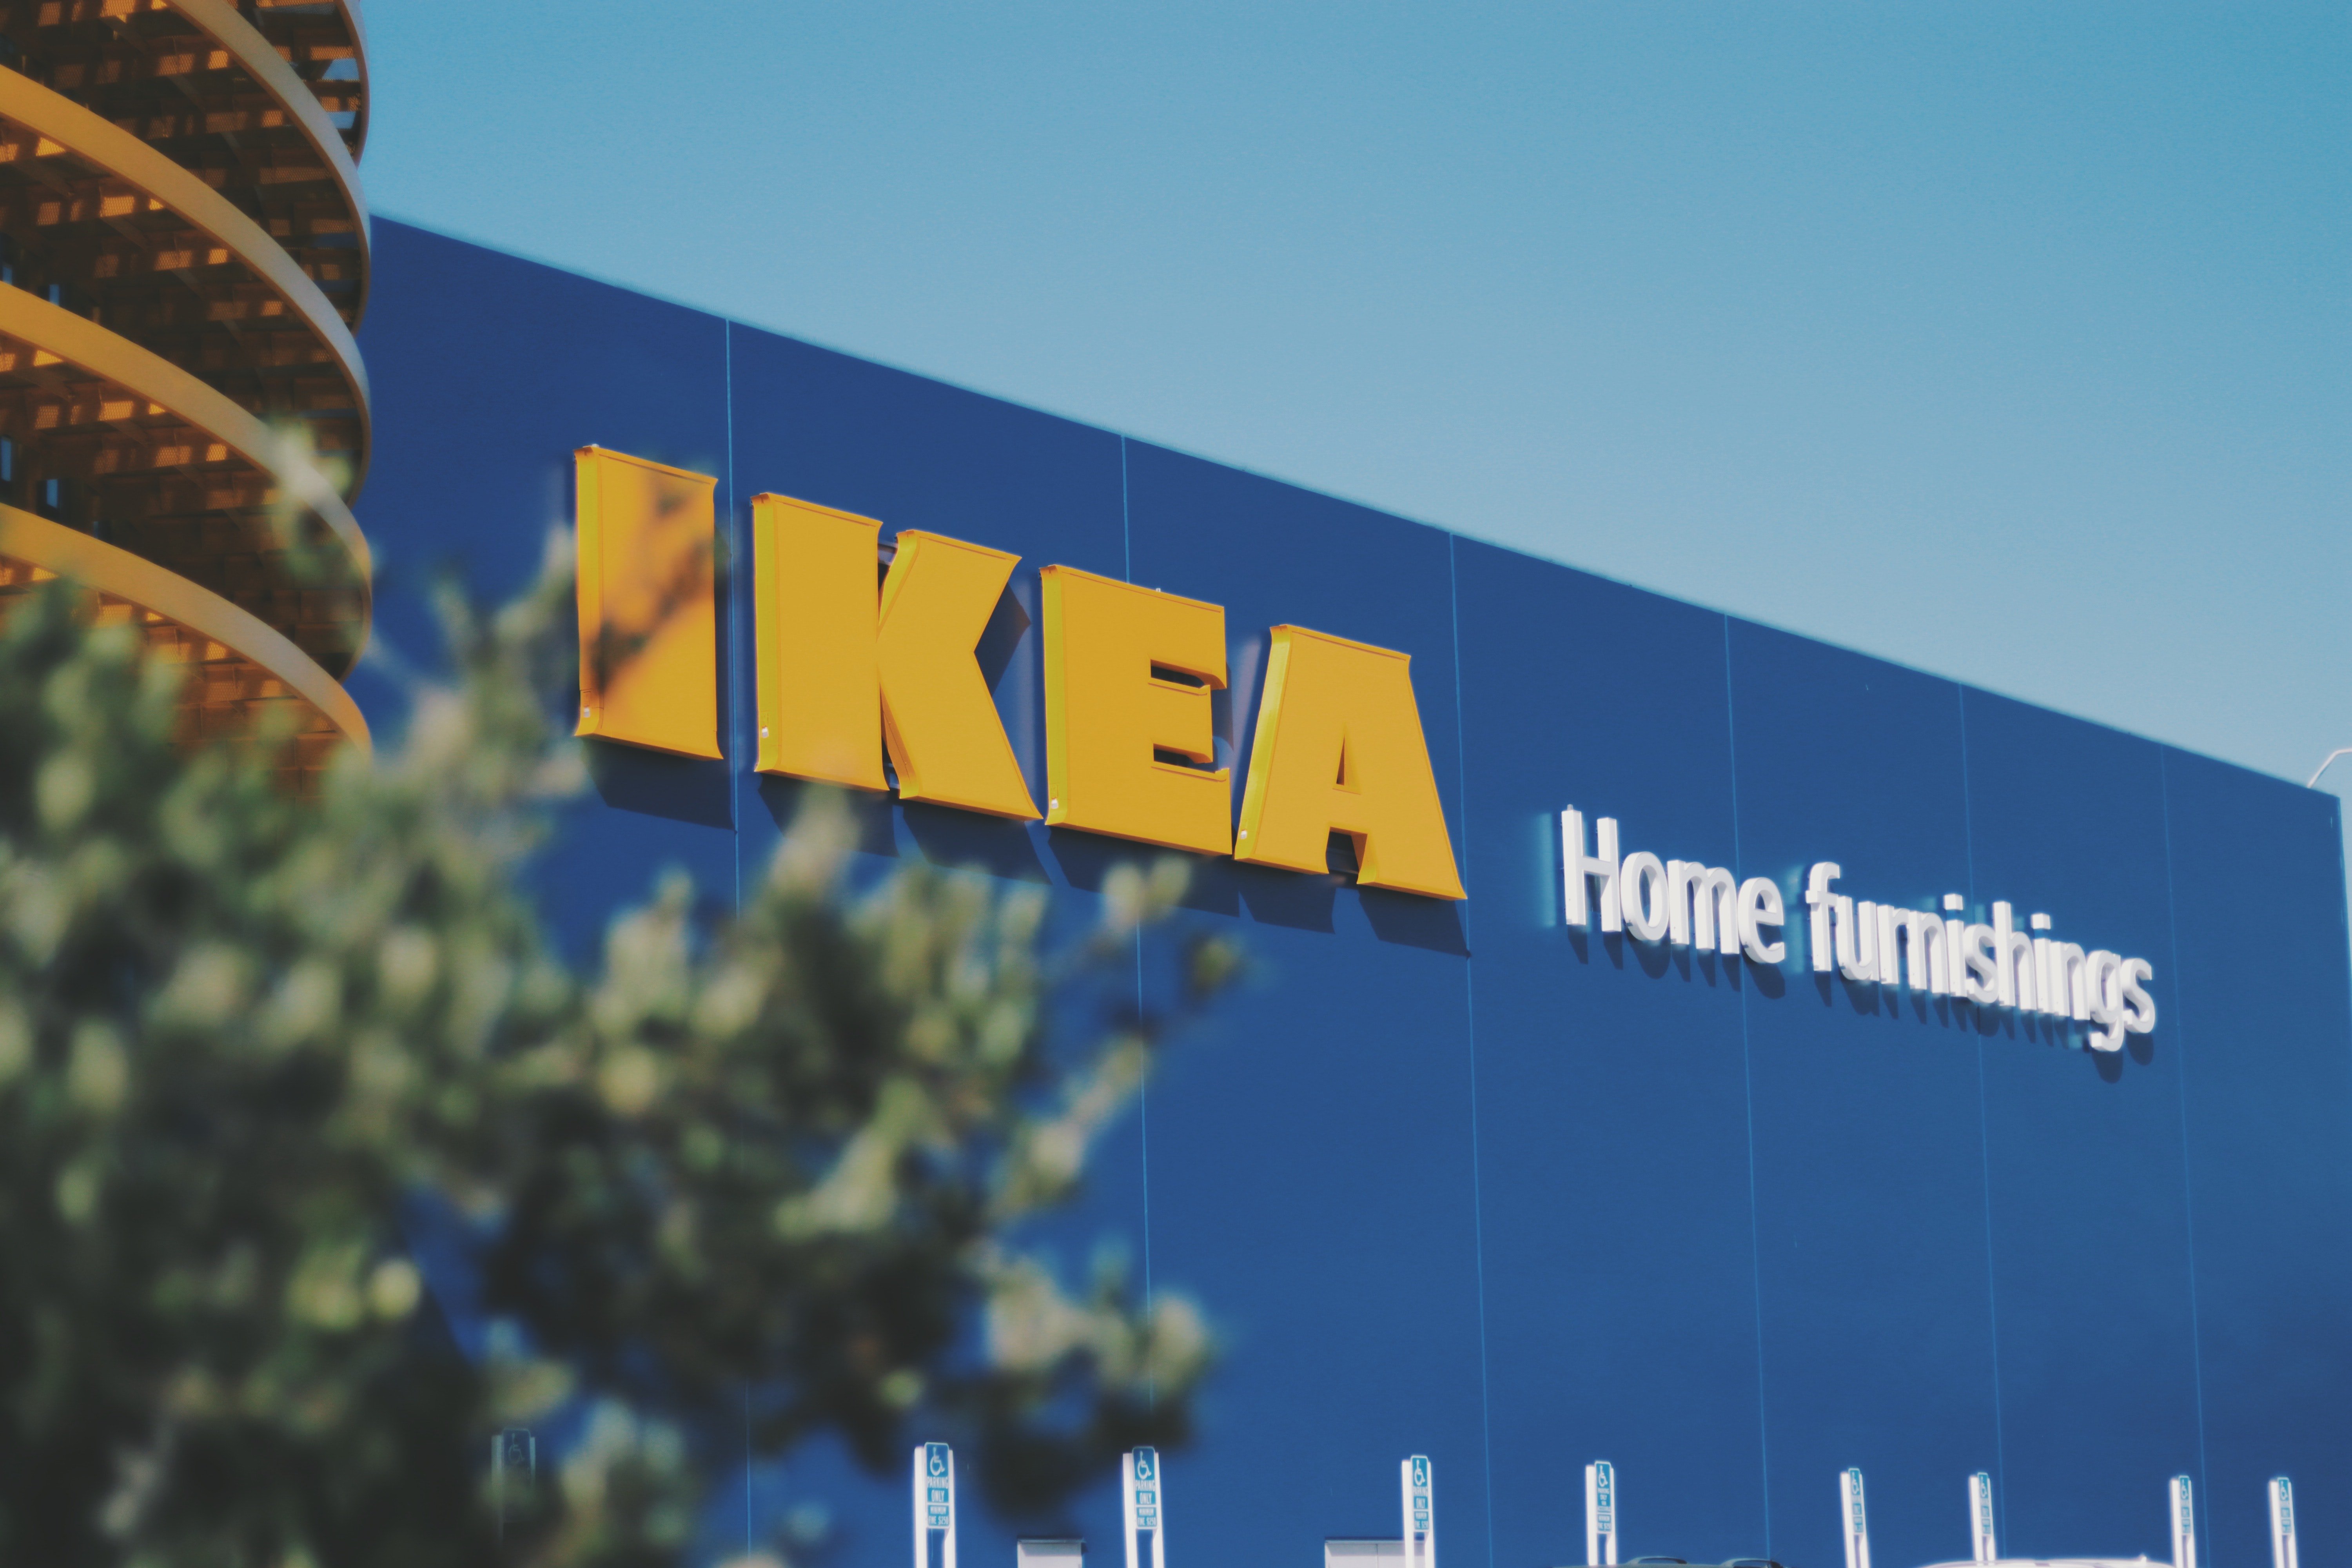 Pictured - IKEA home furnishings building | Source: Pexels